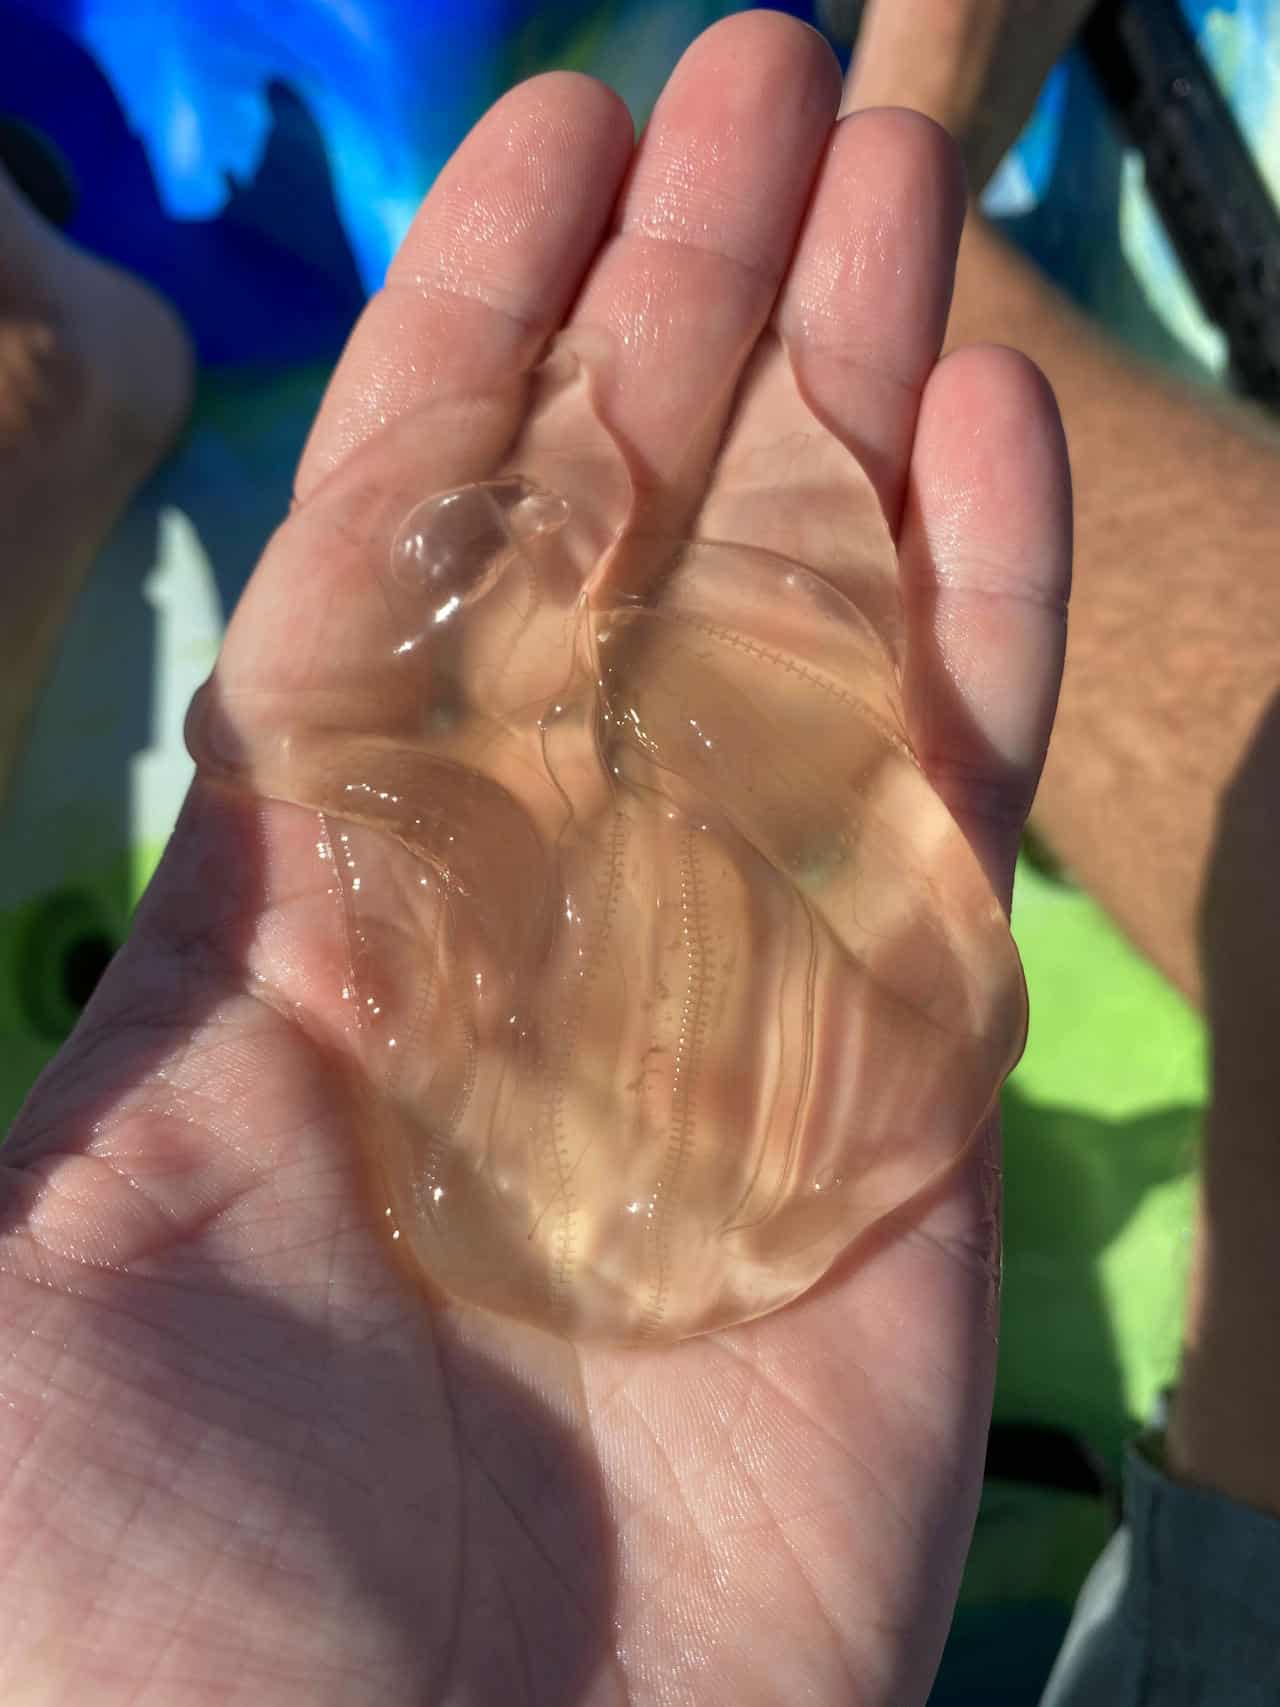 Kayak Tour Guide Holding a Comb Jelly